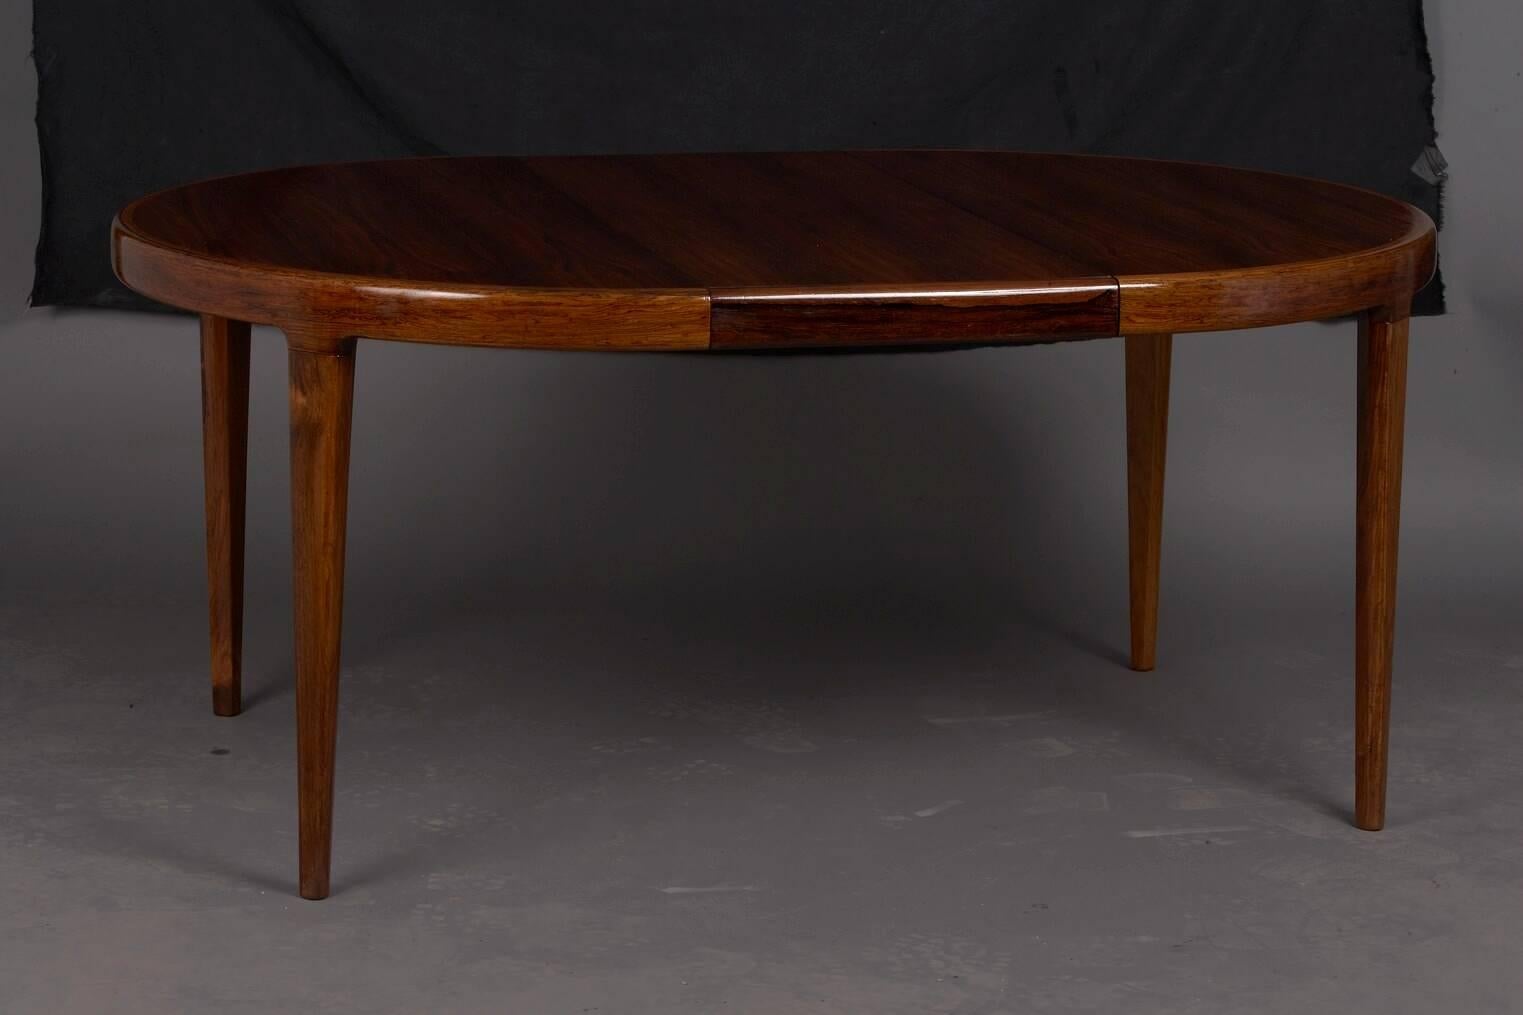 Danish rosewood extension dining table. Burled rosewood veneer used for top. Includes two 19 inch leaves. Dimensions with both leaves installed: 85 in L x 47 in W x 29 in H.